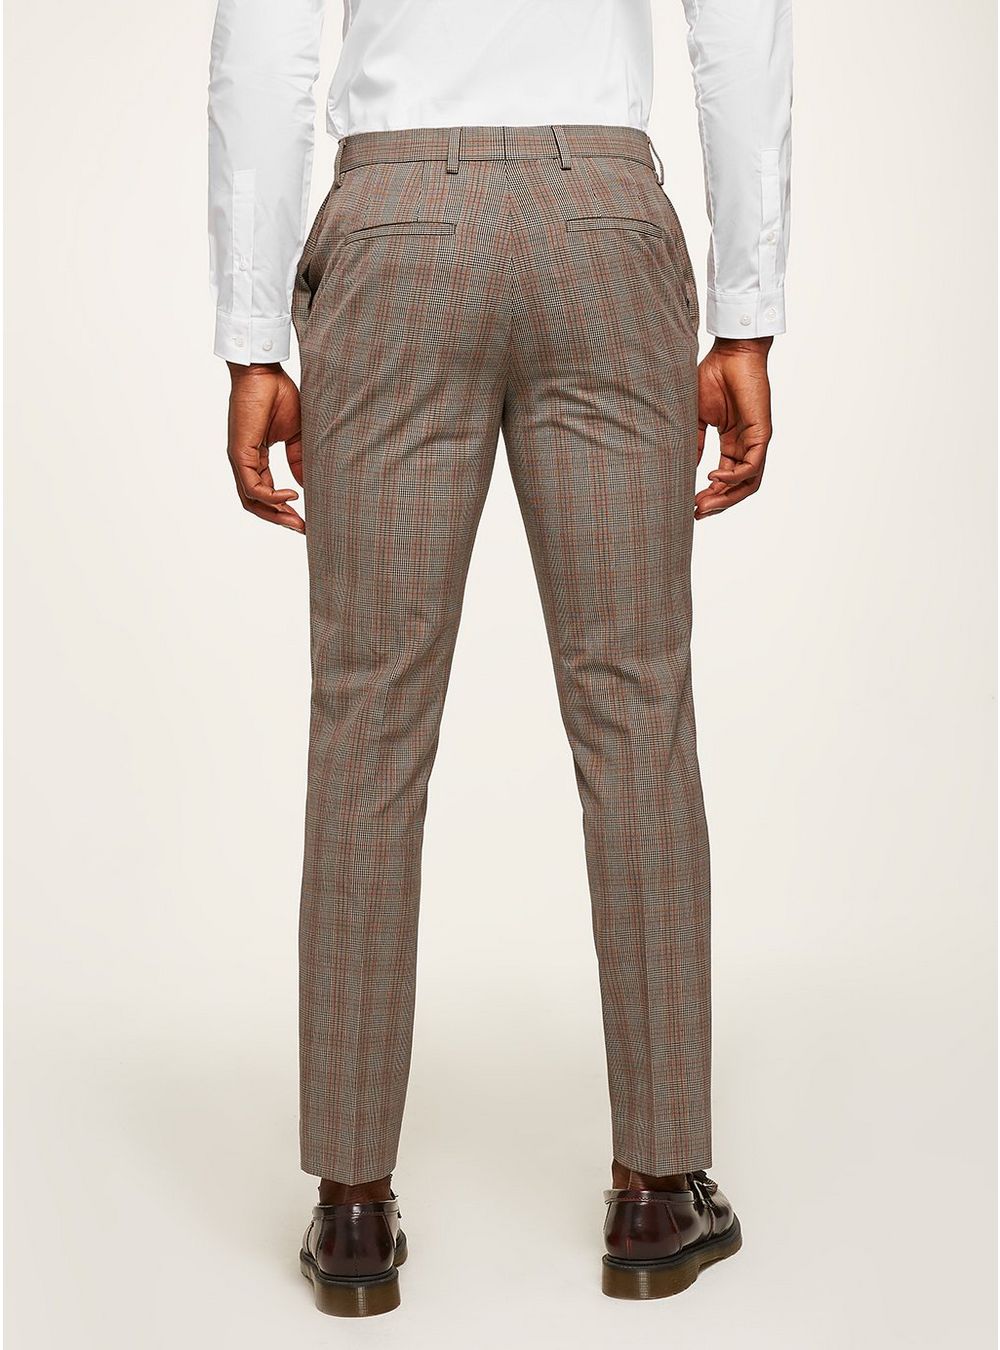 Brown suit trousers brown check muscle suit trousers - shop all sale - sale - topman ZIPLIWR